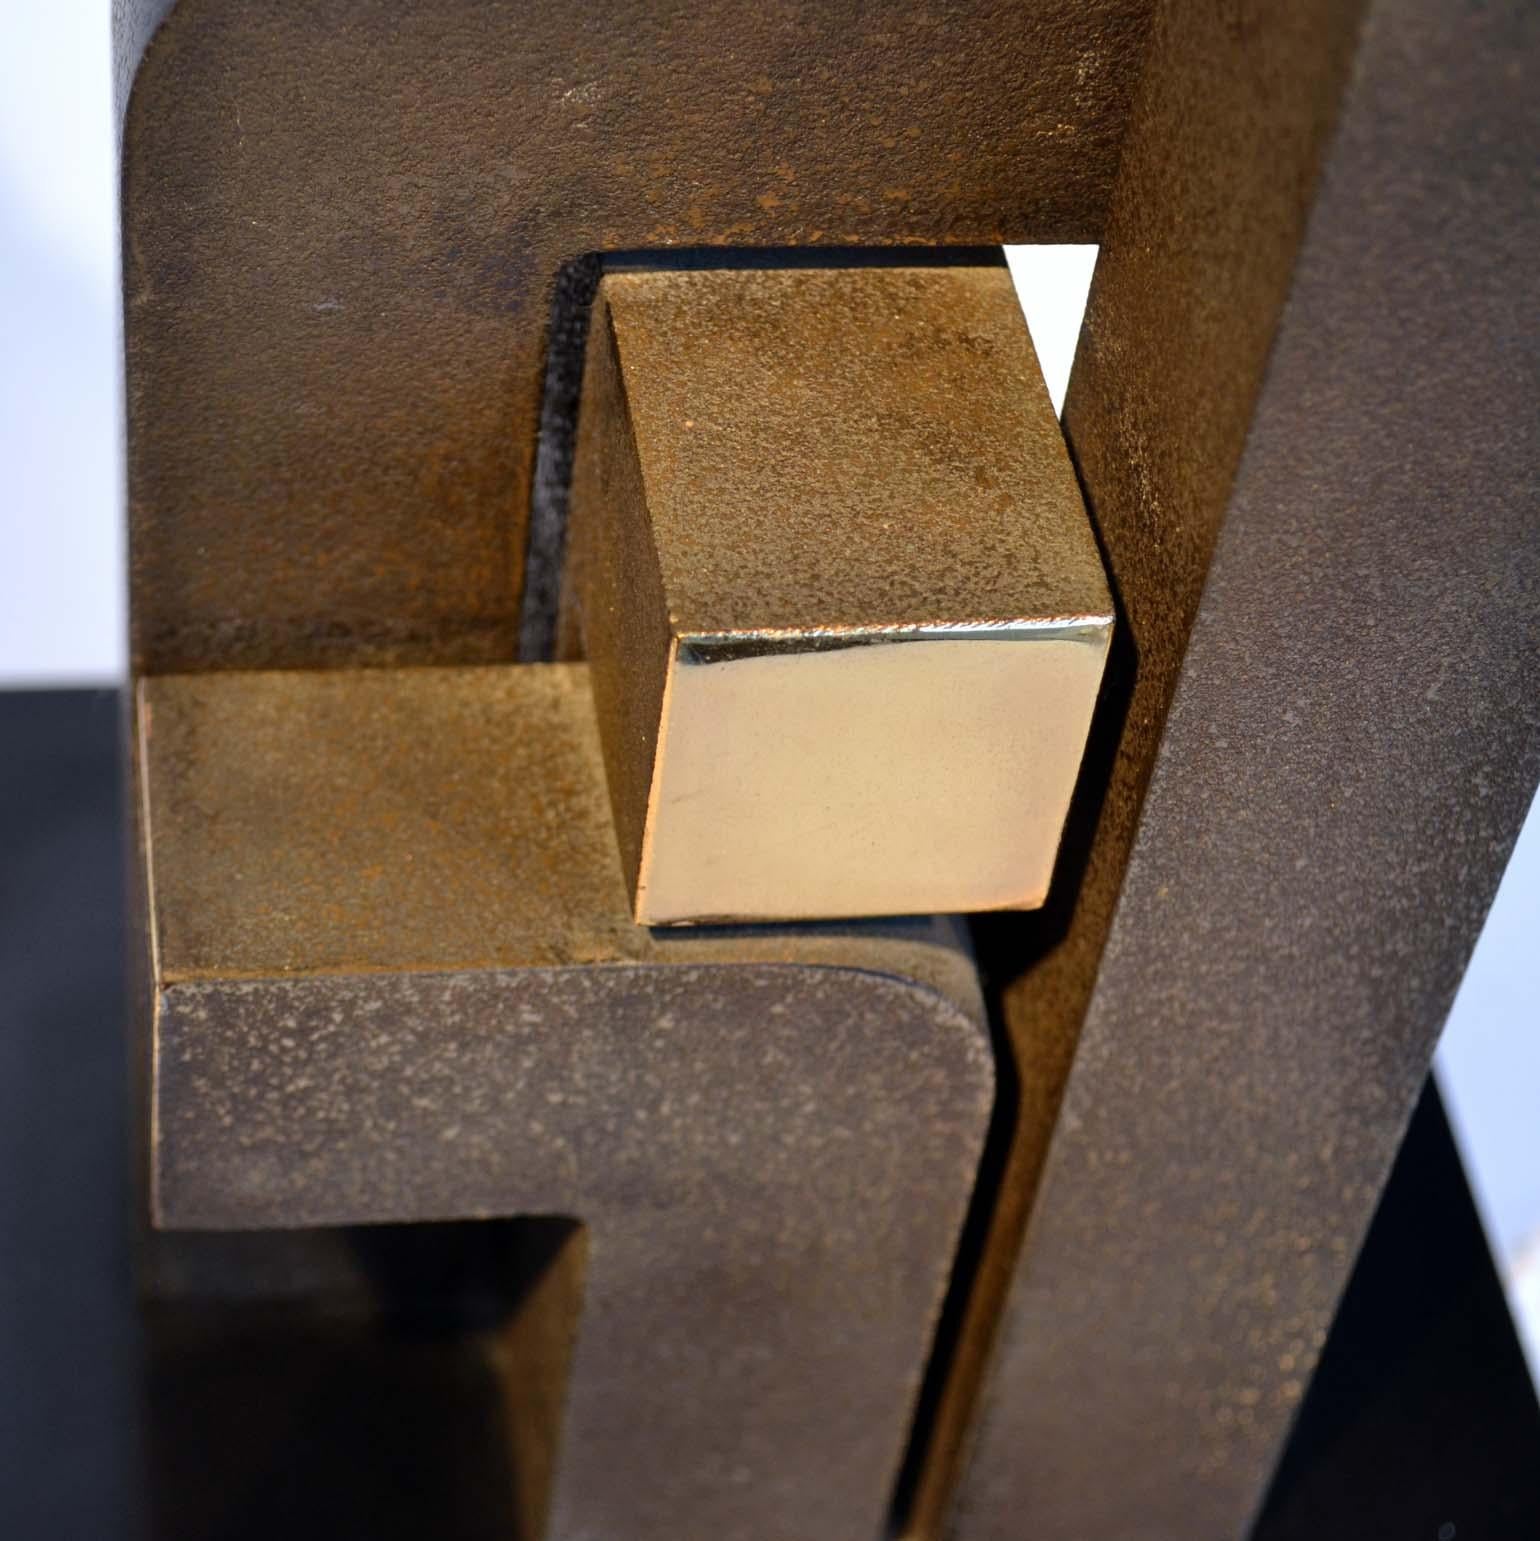 Abstract Geometric Minimalist Bronze Sculpture by Zonena 1979 in Limited Edition 3